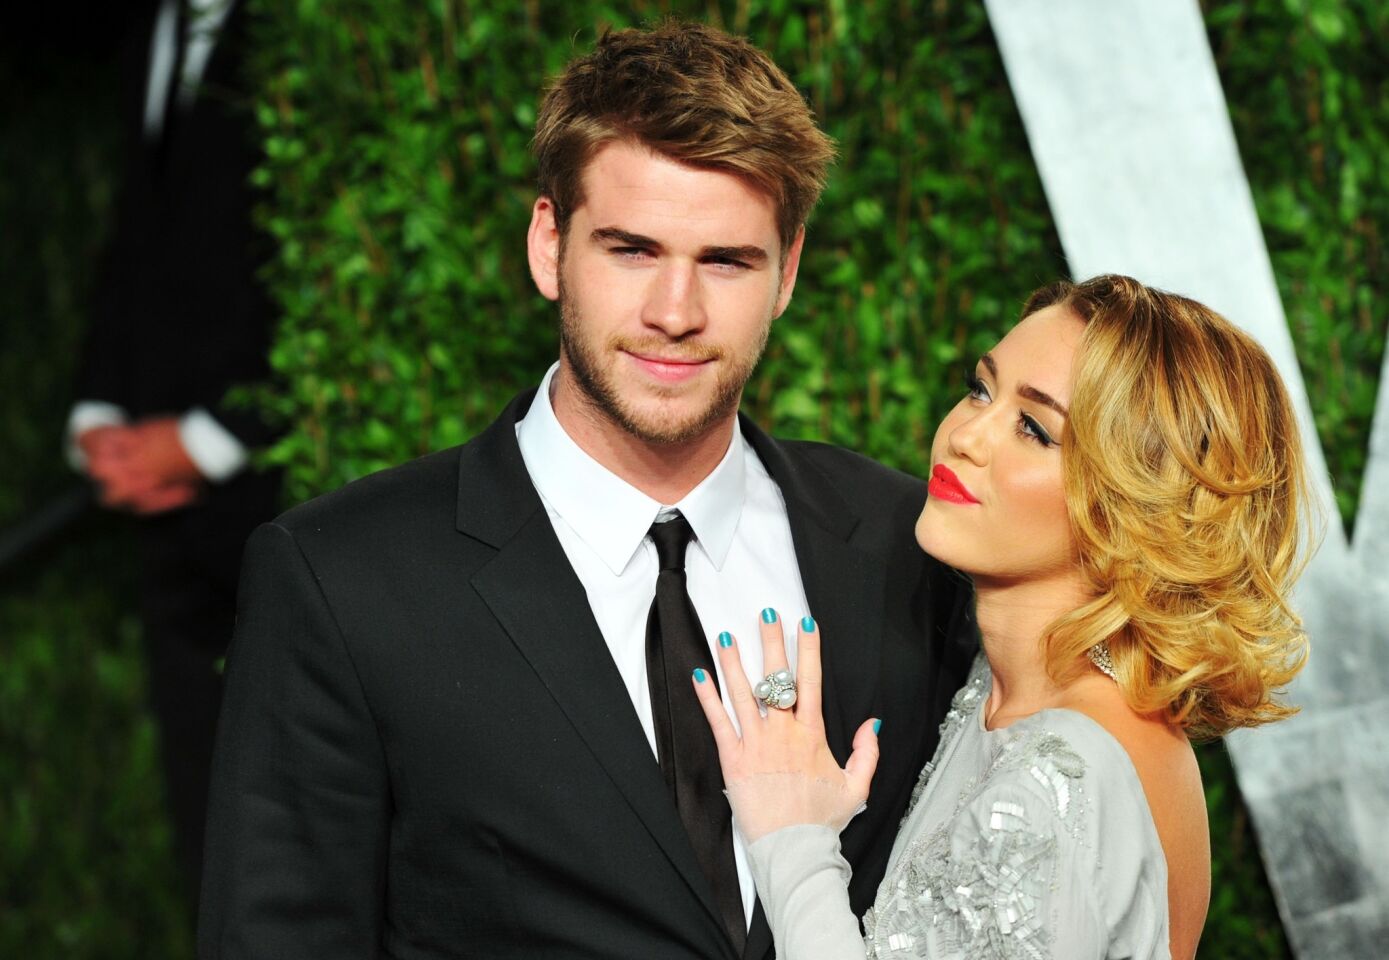 After Miley Cyrus unfollowed Liam Hemsworth on Twitter in September, it was only a matter of time: The two officially called off their engagement. The pair met while making the movie "The Last Song" in 2010 and got engaged in May 2012, but their relationship was reportedly on the rocks for most of 2013 amid rumors of infidelity and Cyrus being spotted without her engagement ring. The "Wrecking Ball" singer was enjoying quite a bit of time in the spotlight after her controversial performance at the MTV VMAs in August; however, soon after the split was announced rumors surfaced that the "The Hunger Games" star was already seeing another woman and Cyrus was getting cozy with one of her record producers. "I'm just letting that chapter kind of close and just looking forward to that new one," Cyrus told Ellen DeGeneres in October, following the split.. "I want to be really clear and determined with everything I'm doing in my life right now, and I have been .... I keep saying I'm the happiest I've ever been, and that's not even a dig." MORE: Miley Cyrus, Liam Hemsworth call it quits, end engagement